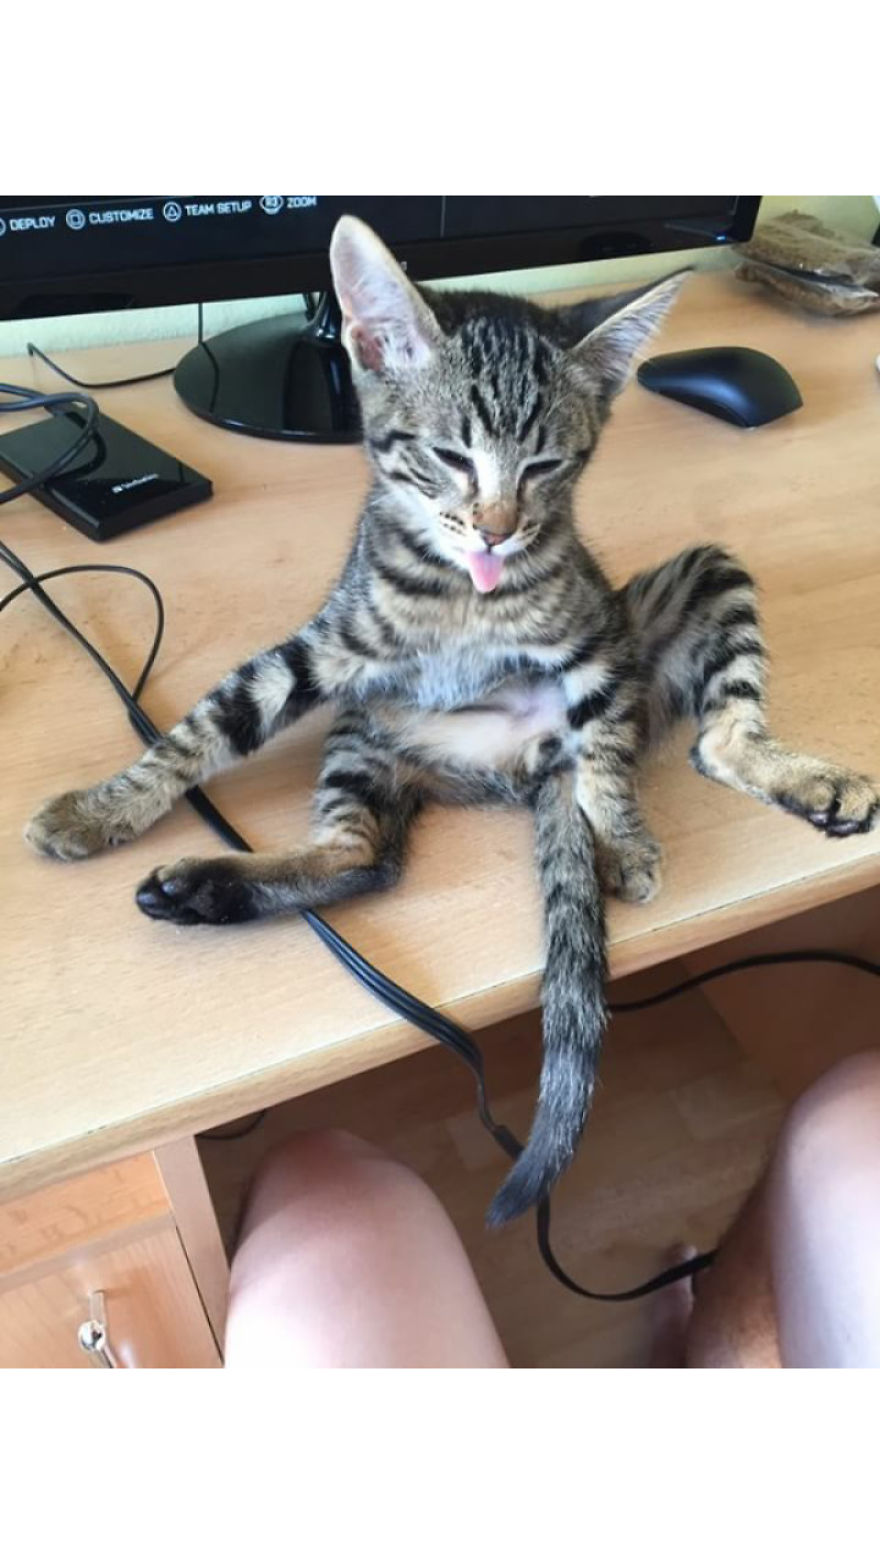 Enjoy Koulis The Cat, Sitting Like Human And Looking Good Is What He Is Best At!